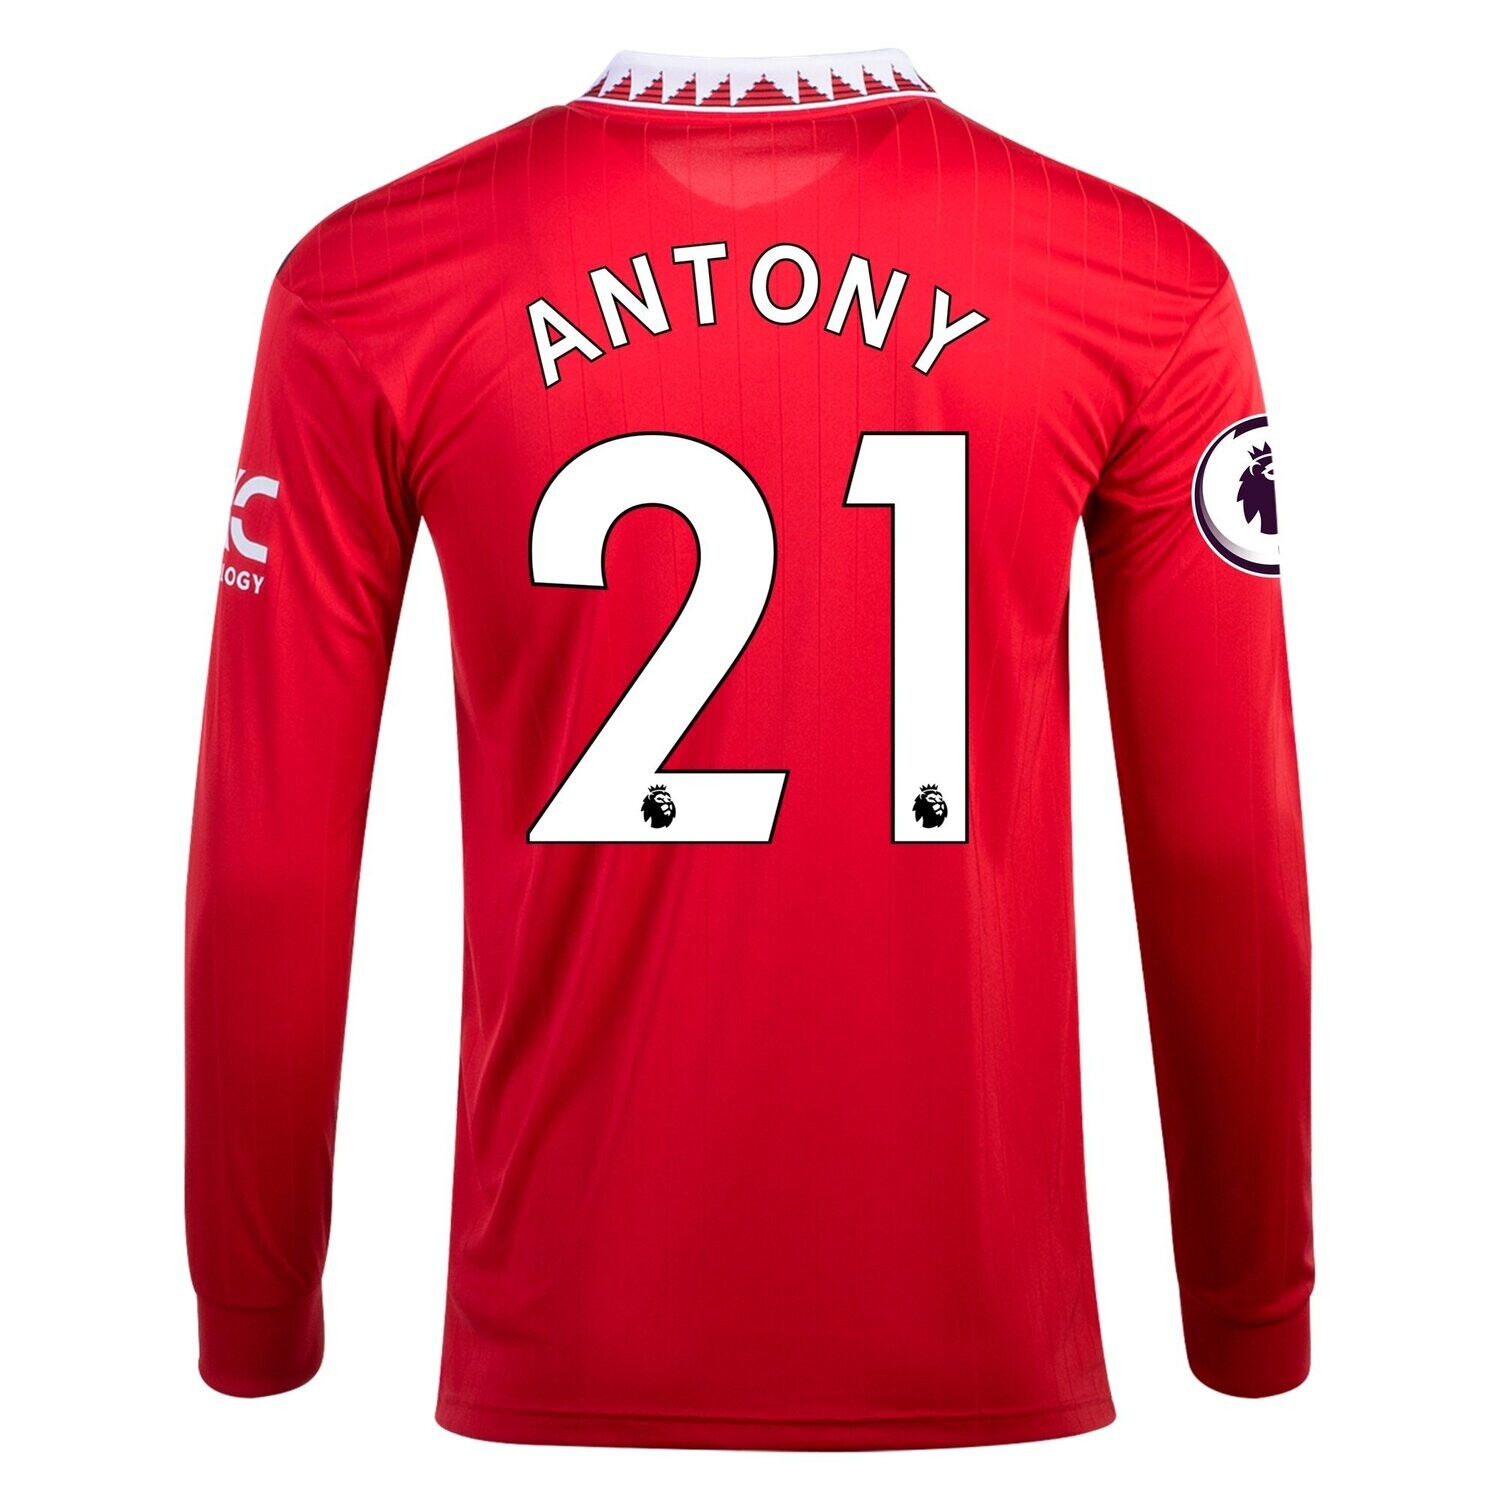 Antony #21 Manchester United Home Long Sleeve Jersey 22-23